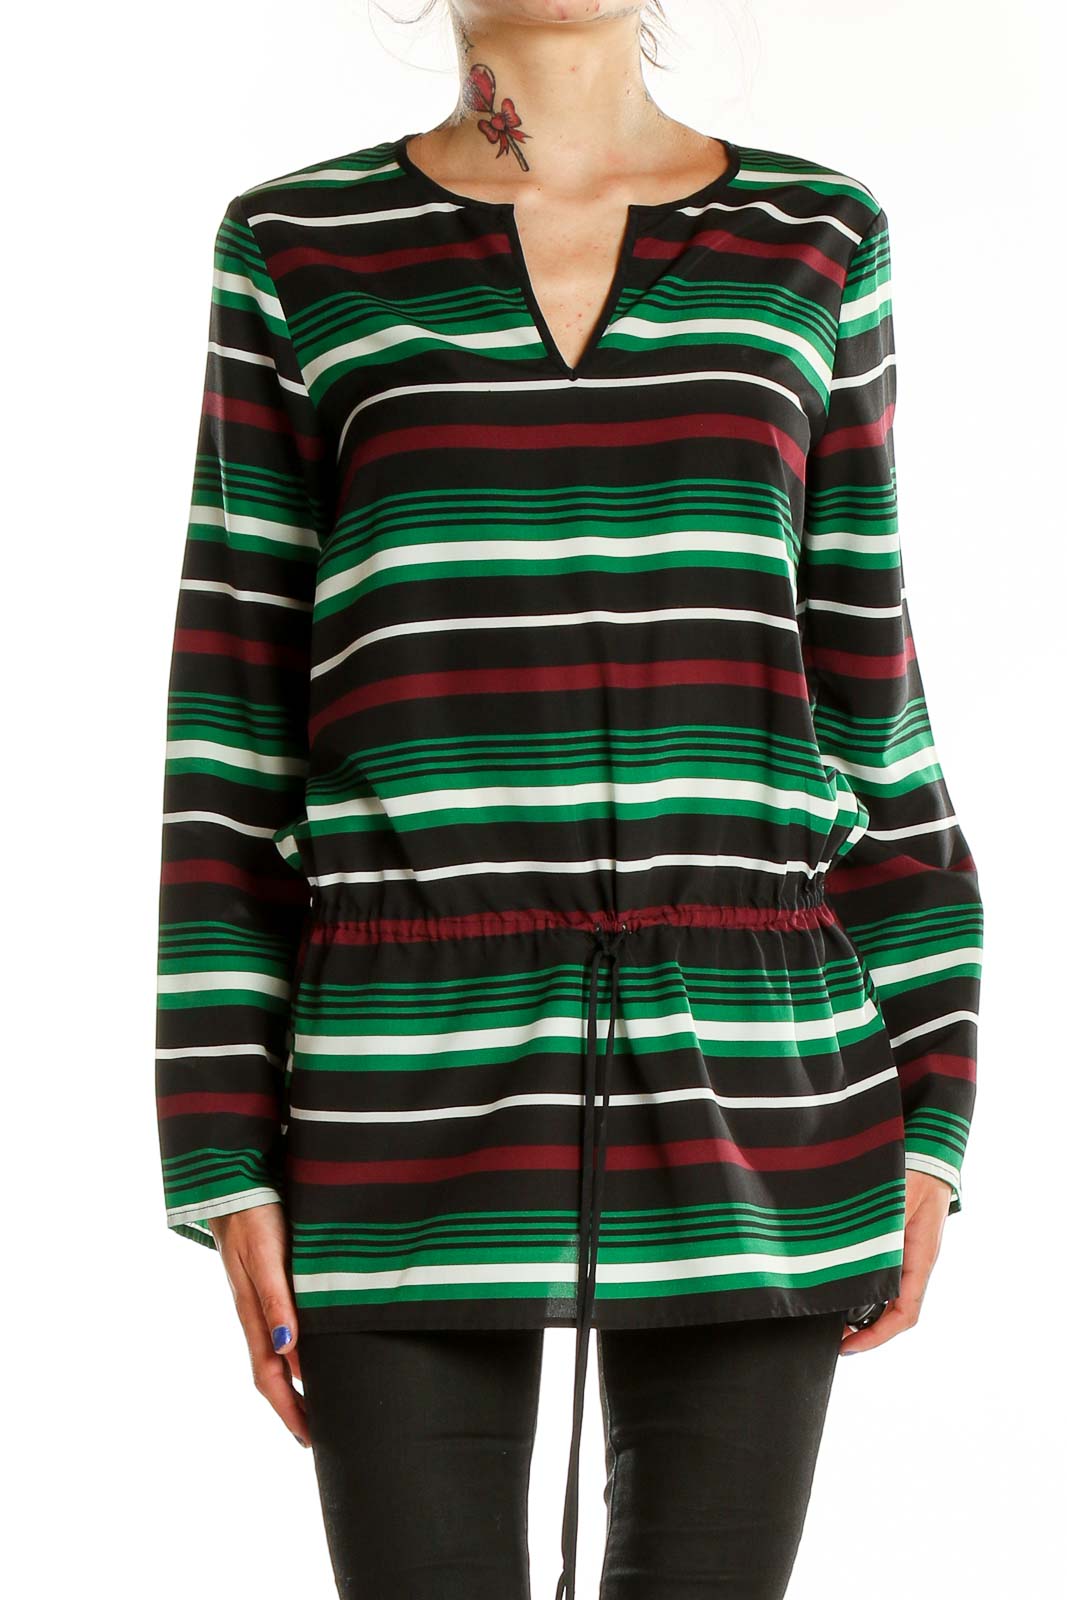 Black Green Striped Blouse Front